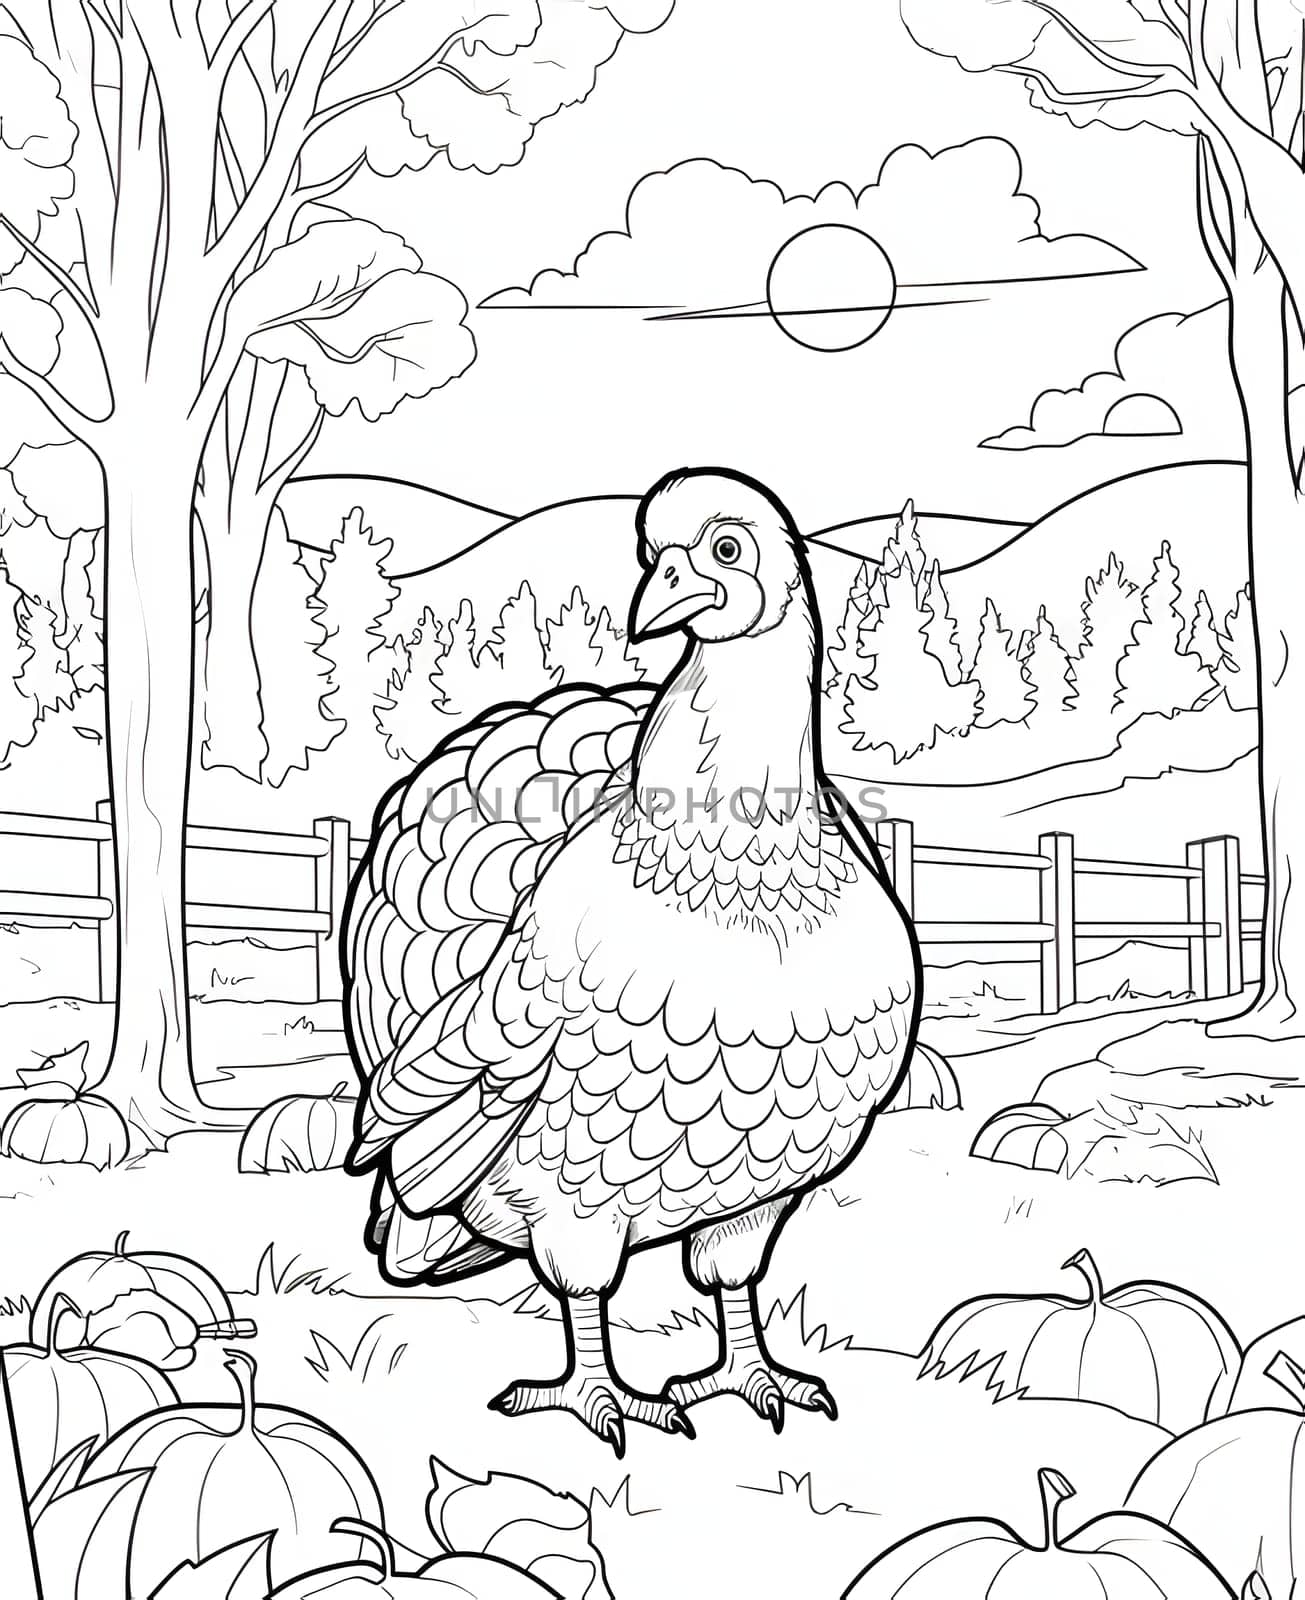 Black and White coloring book small turkey in a pumpkin field, farm. Turkey as the main dish of thanksgiving for the harvest. by ThemesS